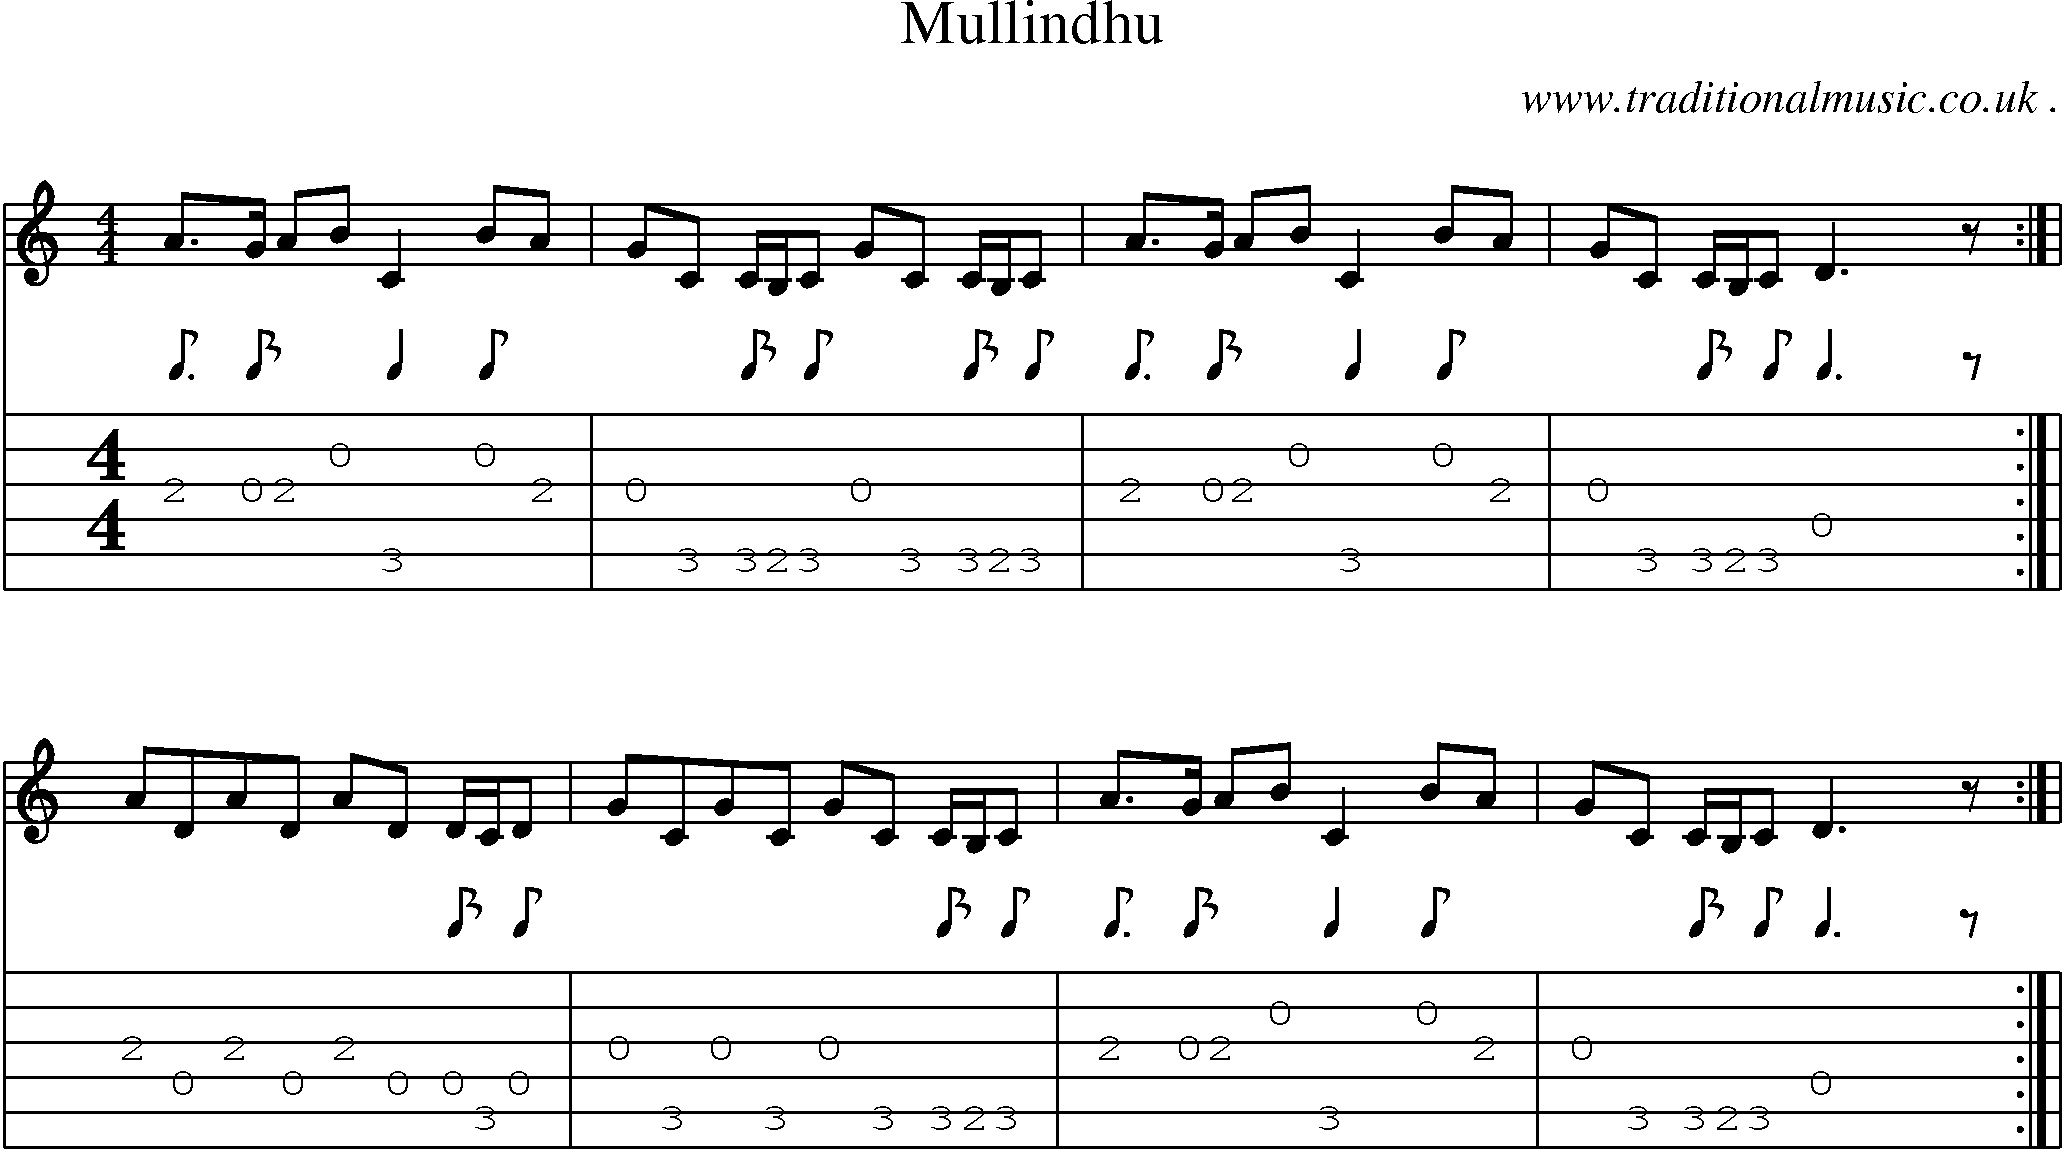 Sheet-Music and Guitar Tabs for Mullindhu